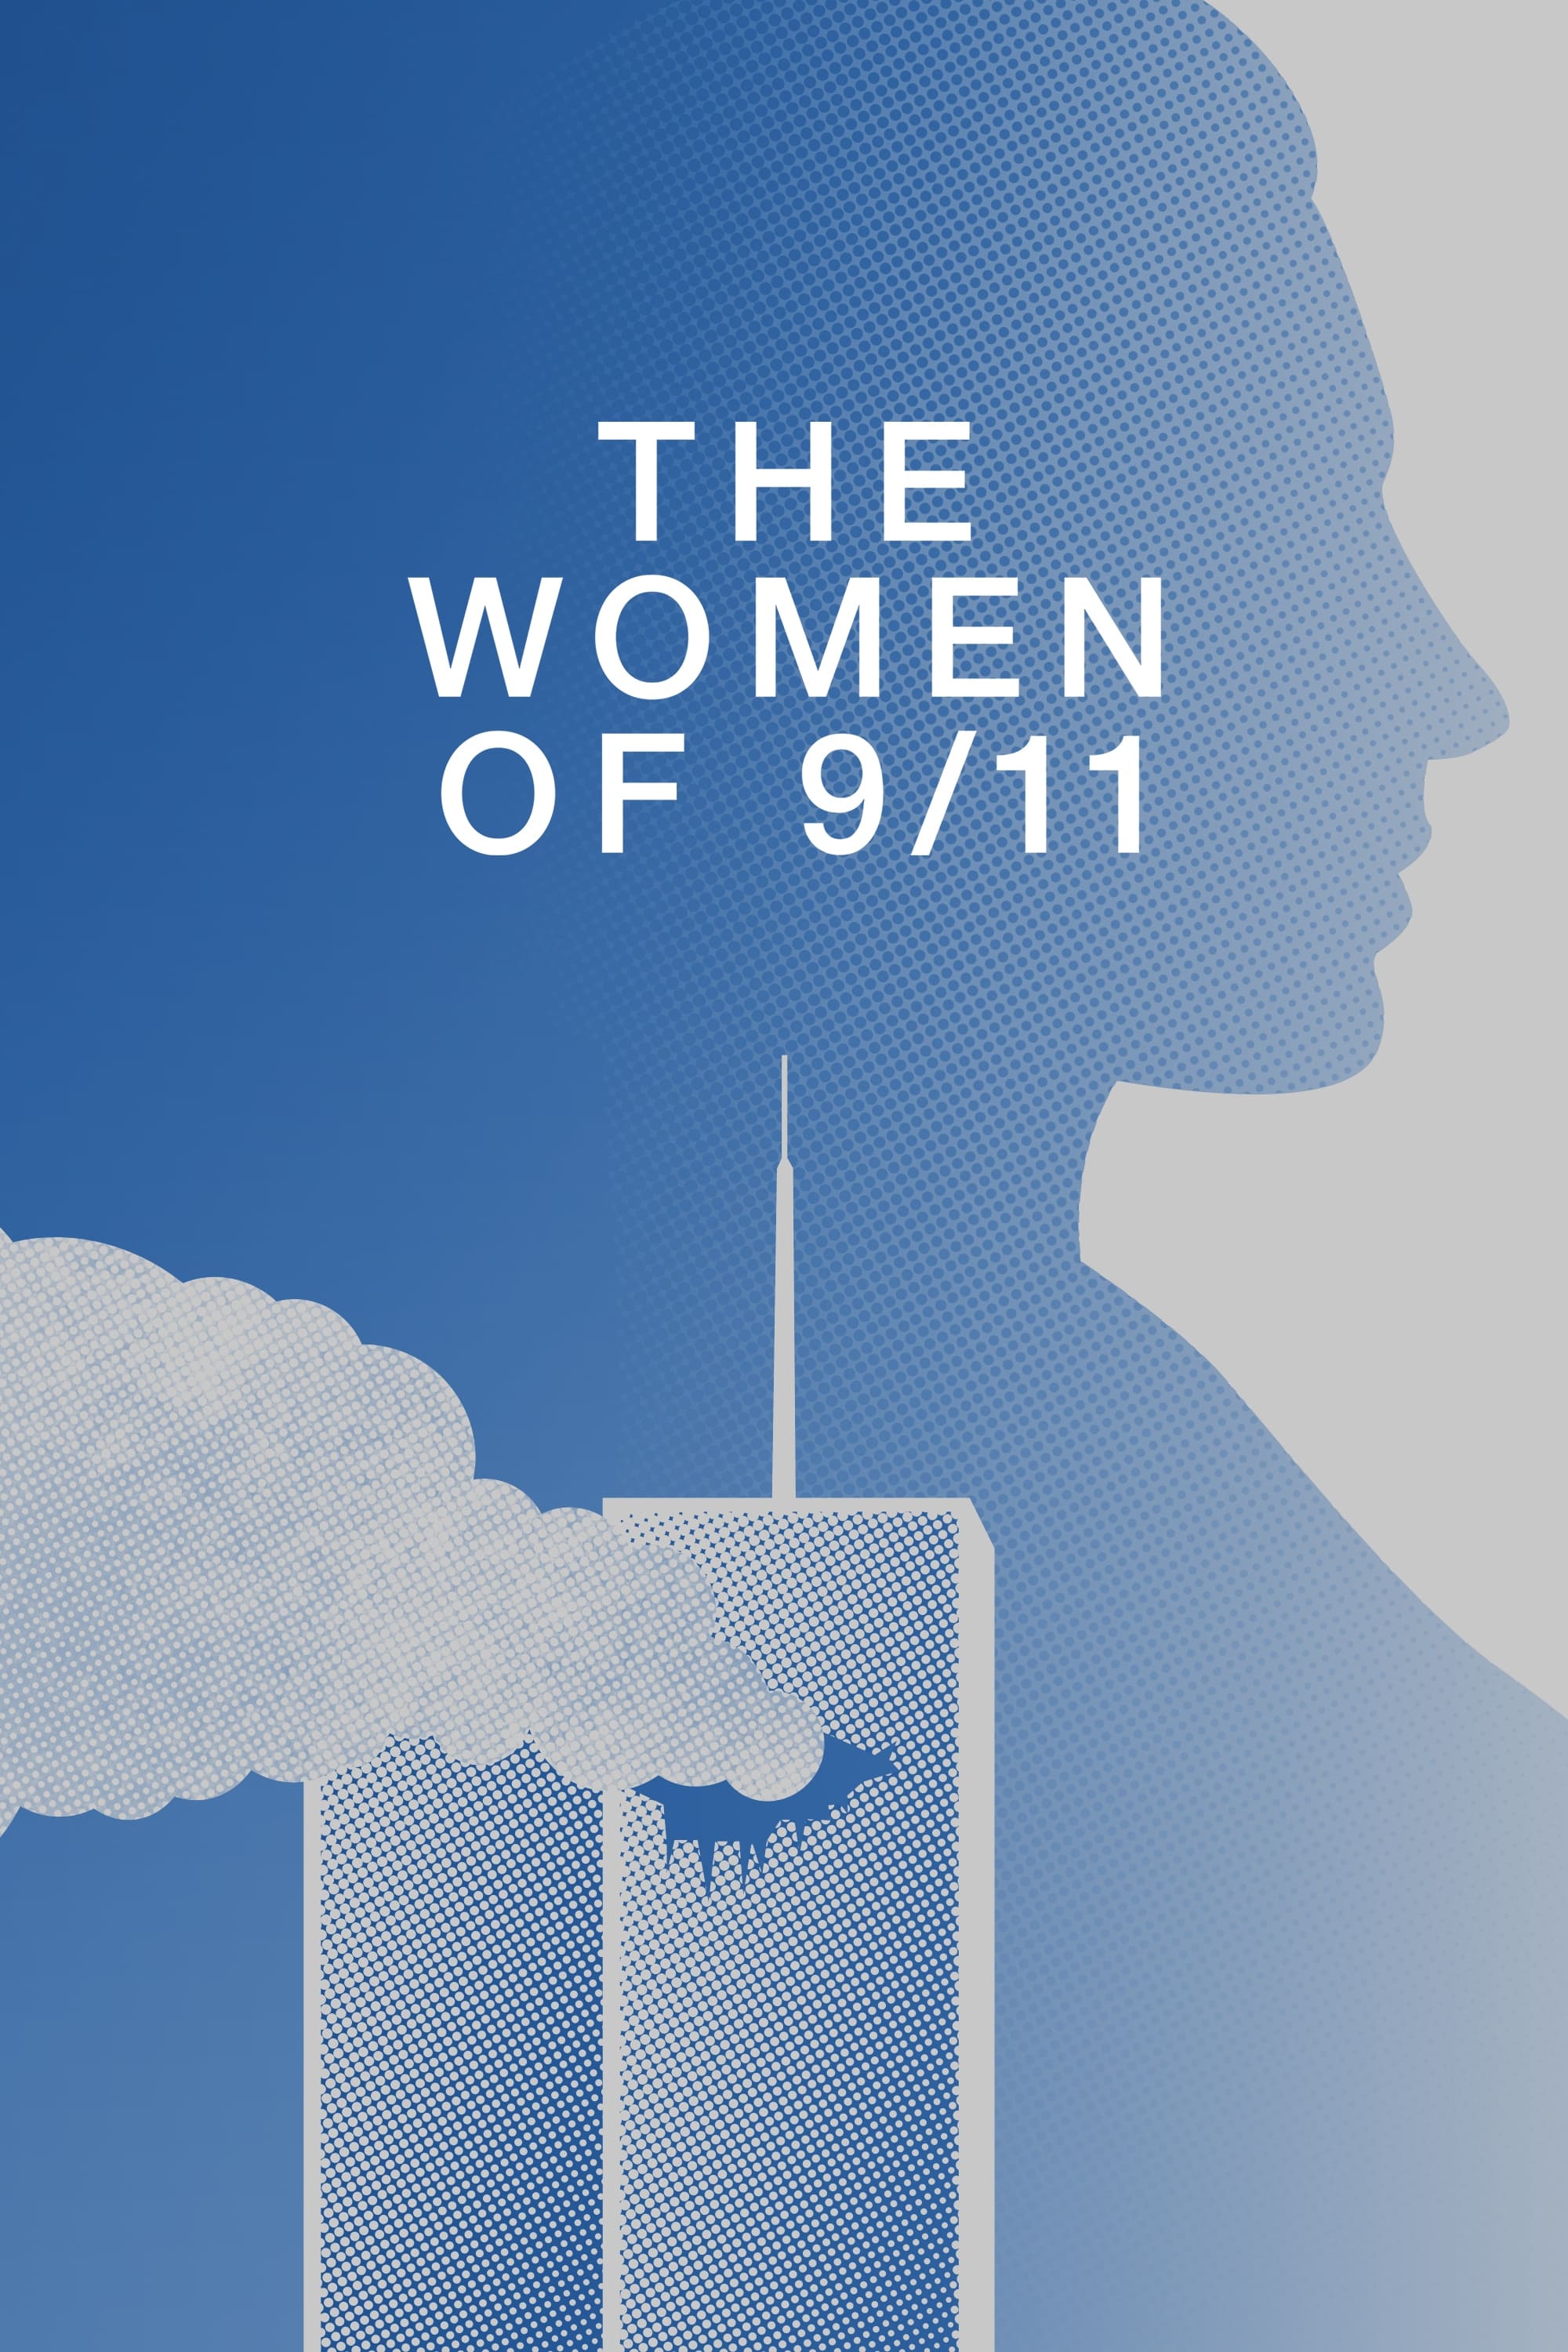 Women of 9/11: A Special Edition of 20/20 with Robin Roberts